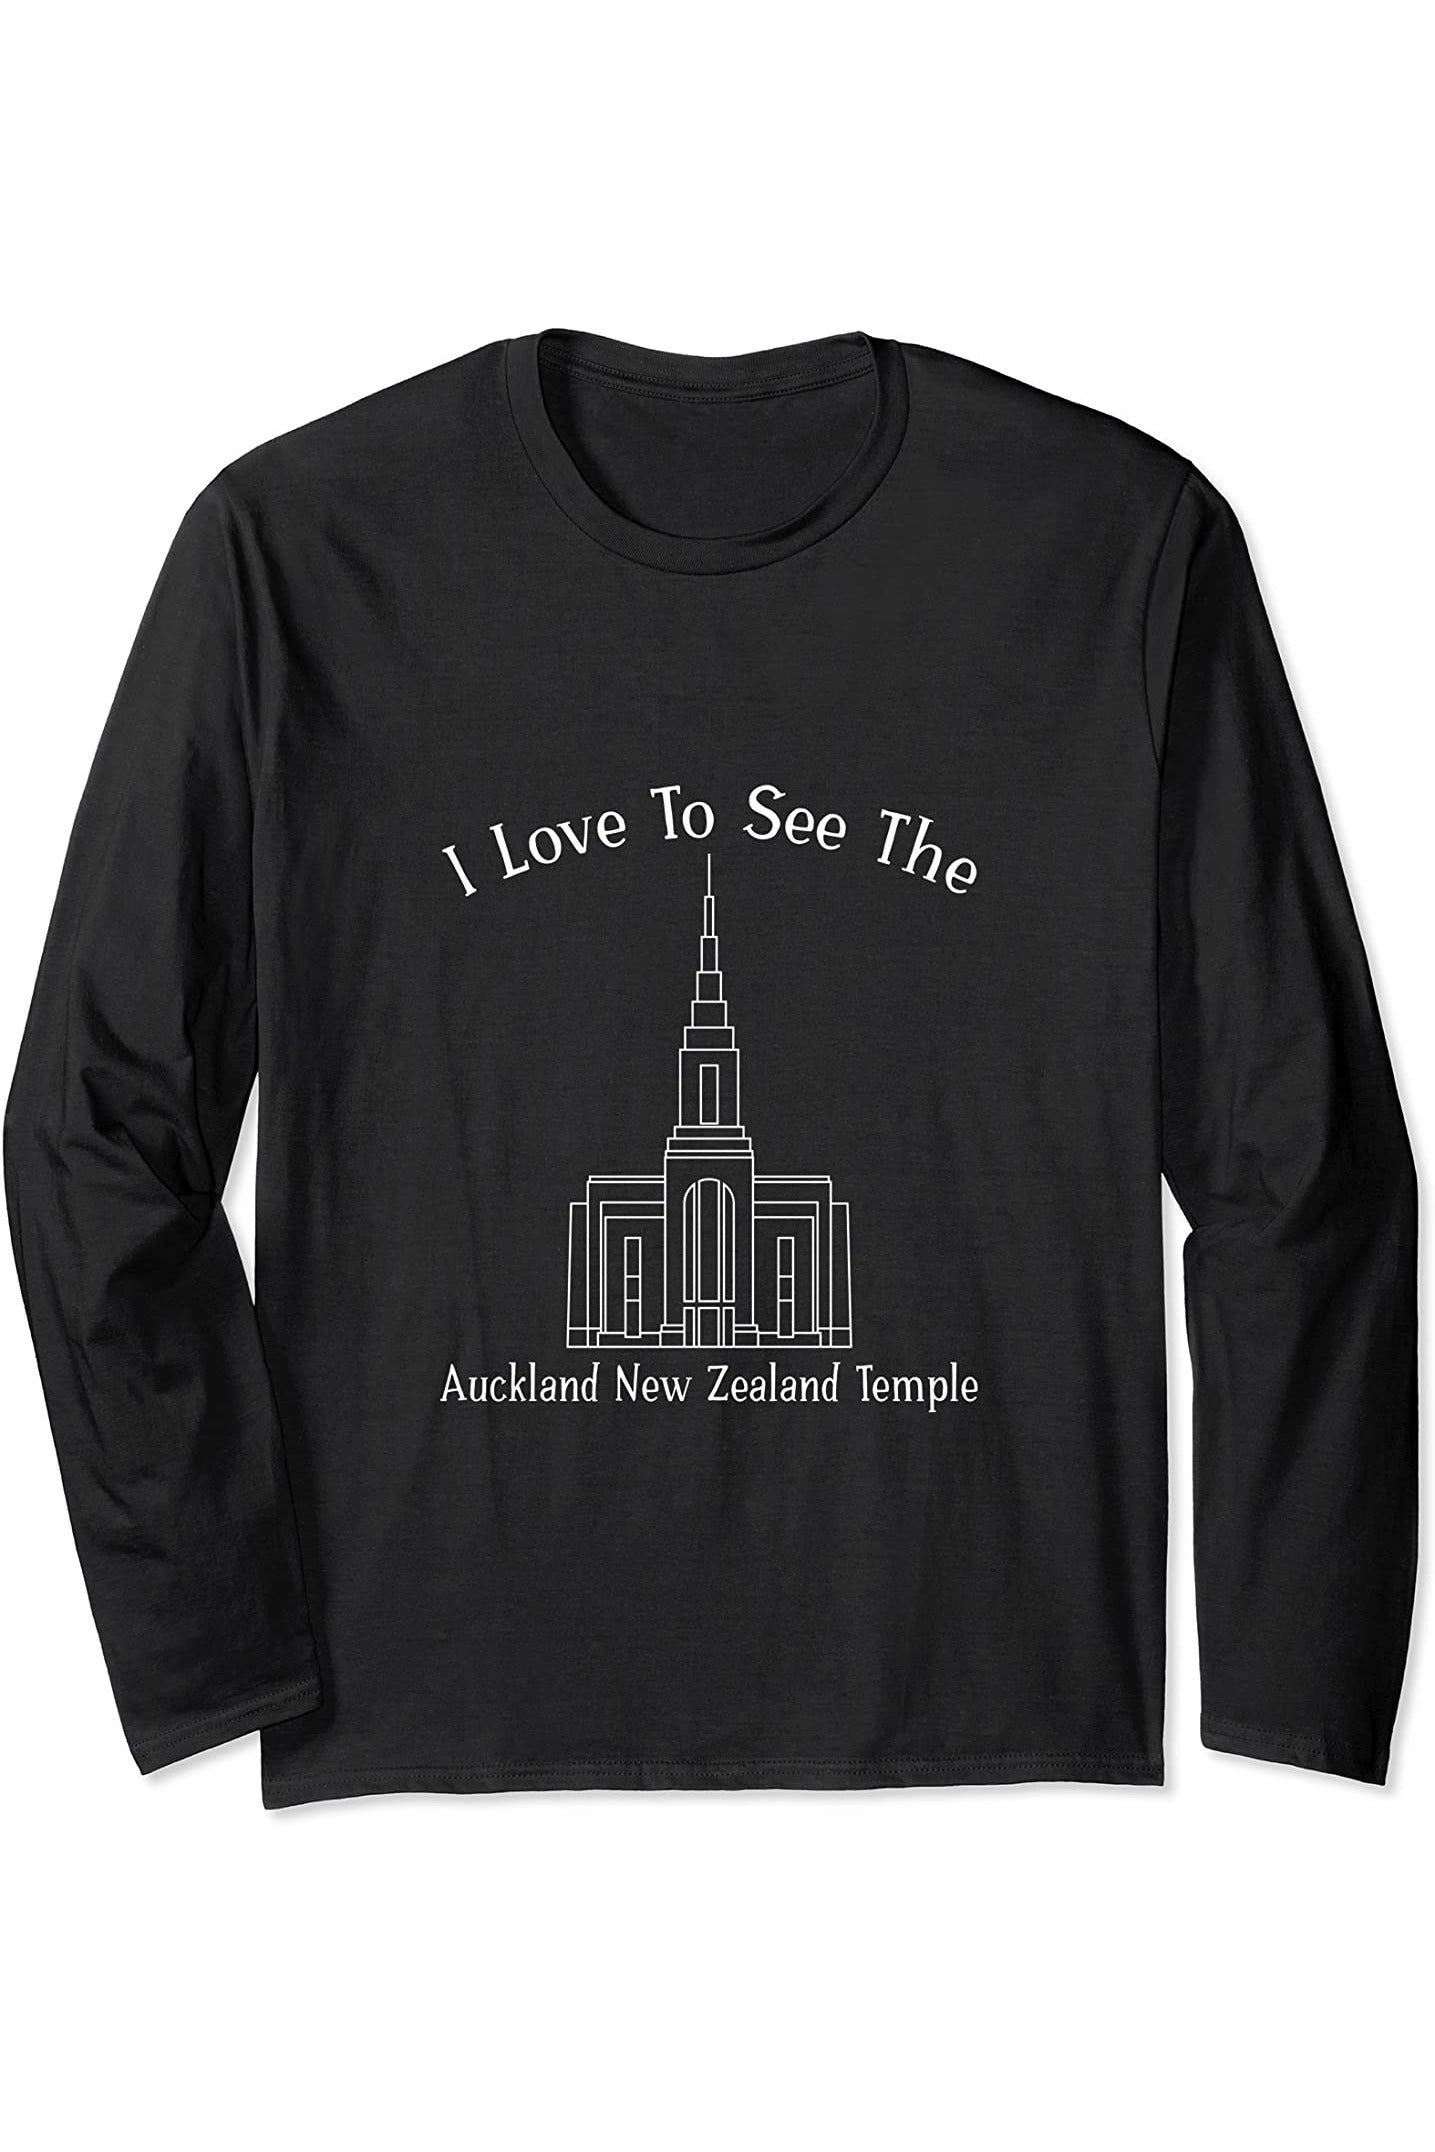 Auckland New Zealand Temple Long Sleeve T-Shirt - Happy Style (English) US